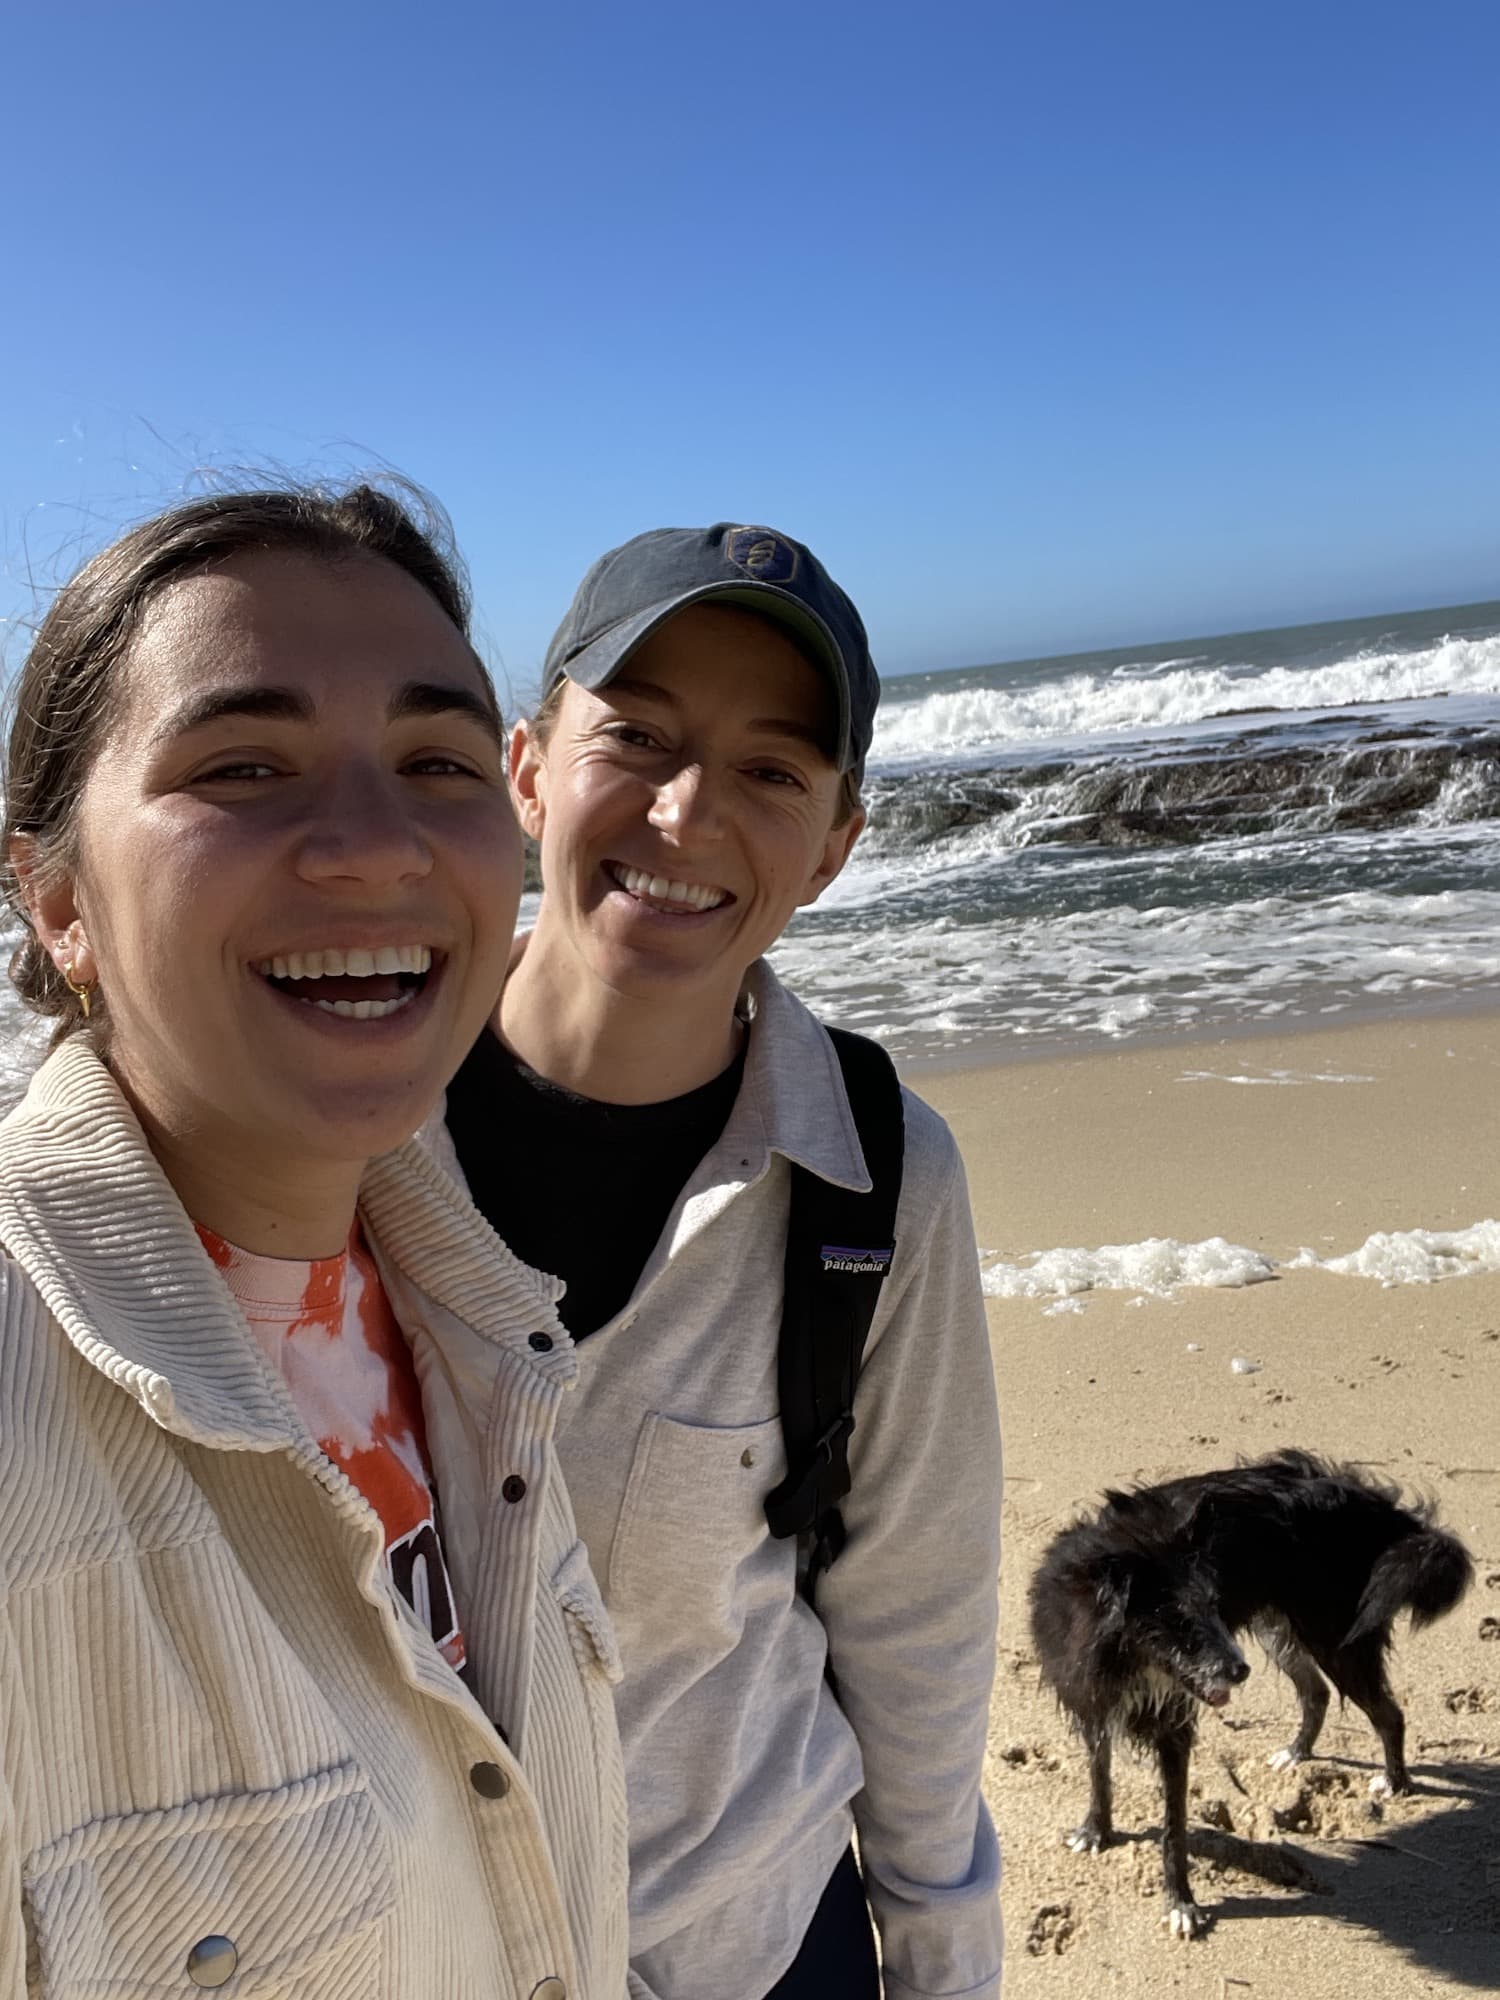 My friend and I with her dog on the beach